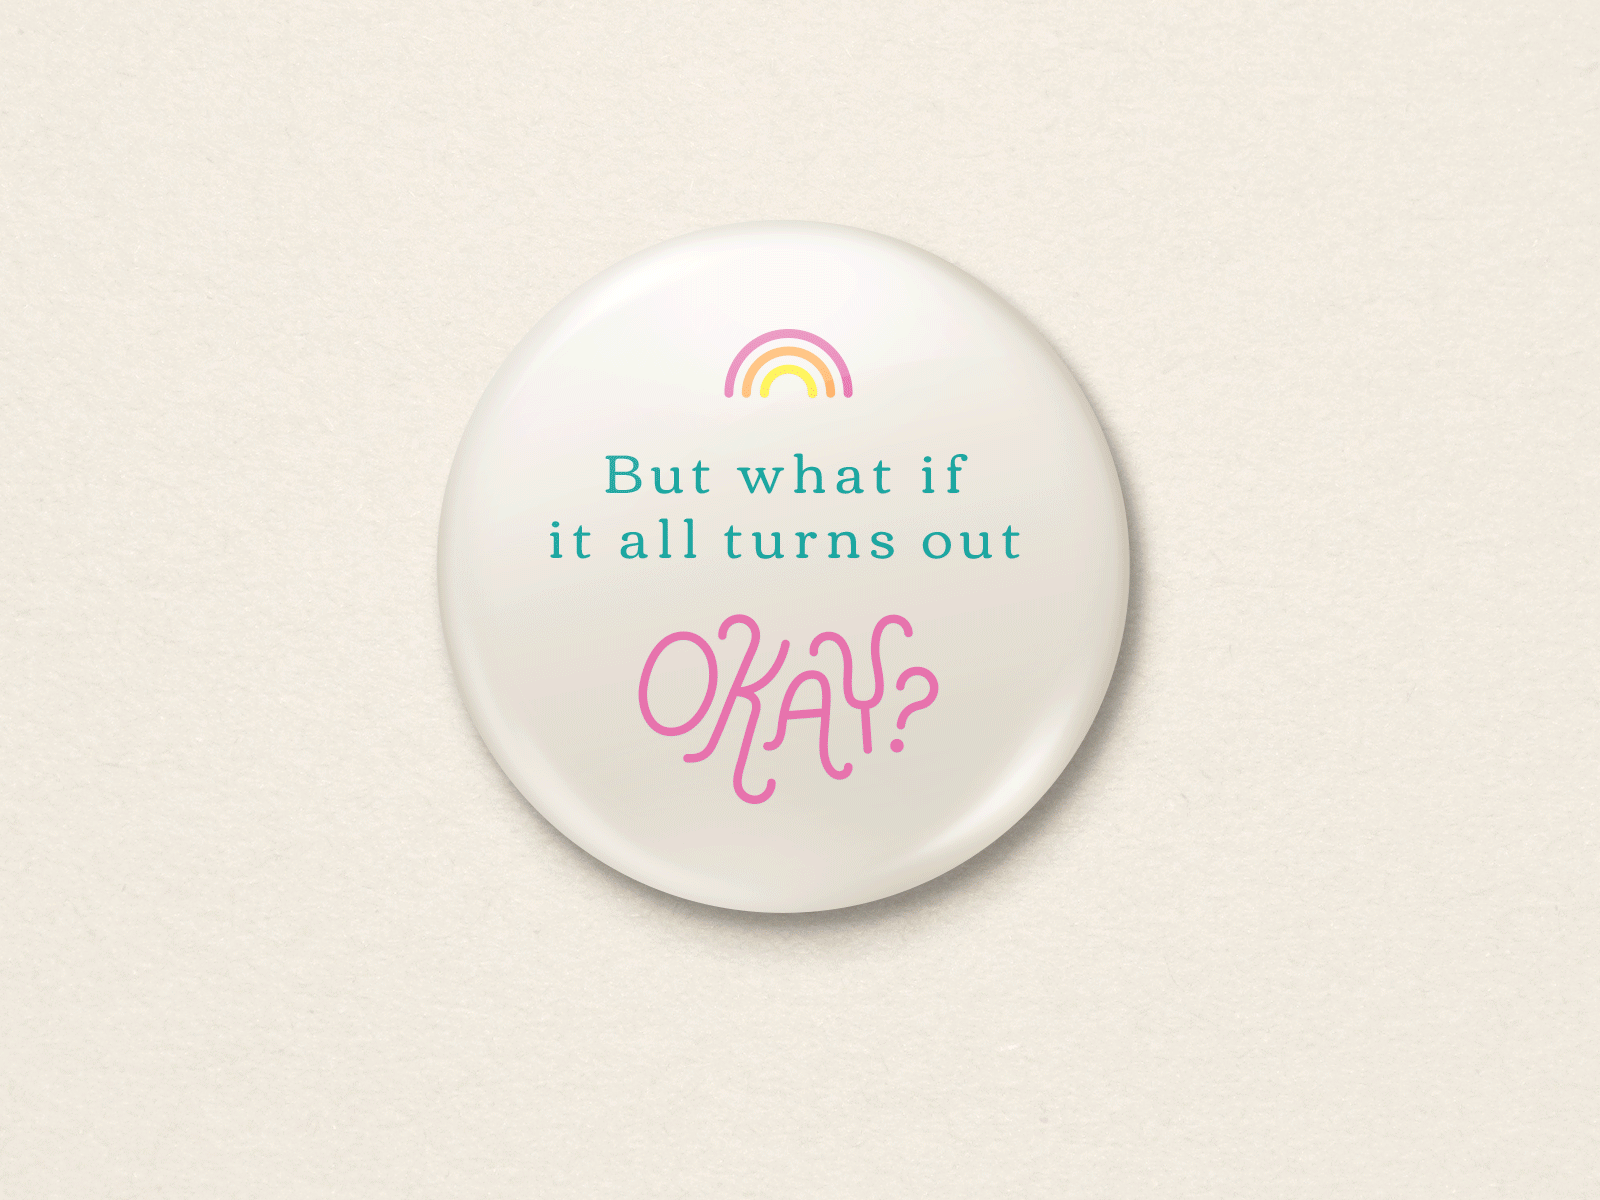 "What if it all turns out okay?" - Button button design encouragement enneagram pins quote typogaphy